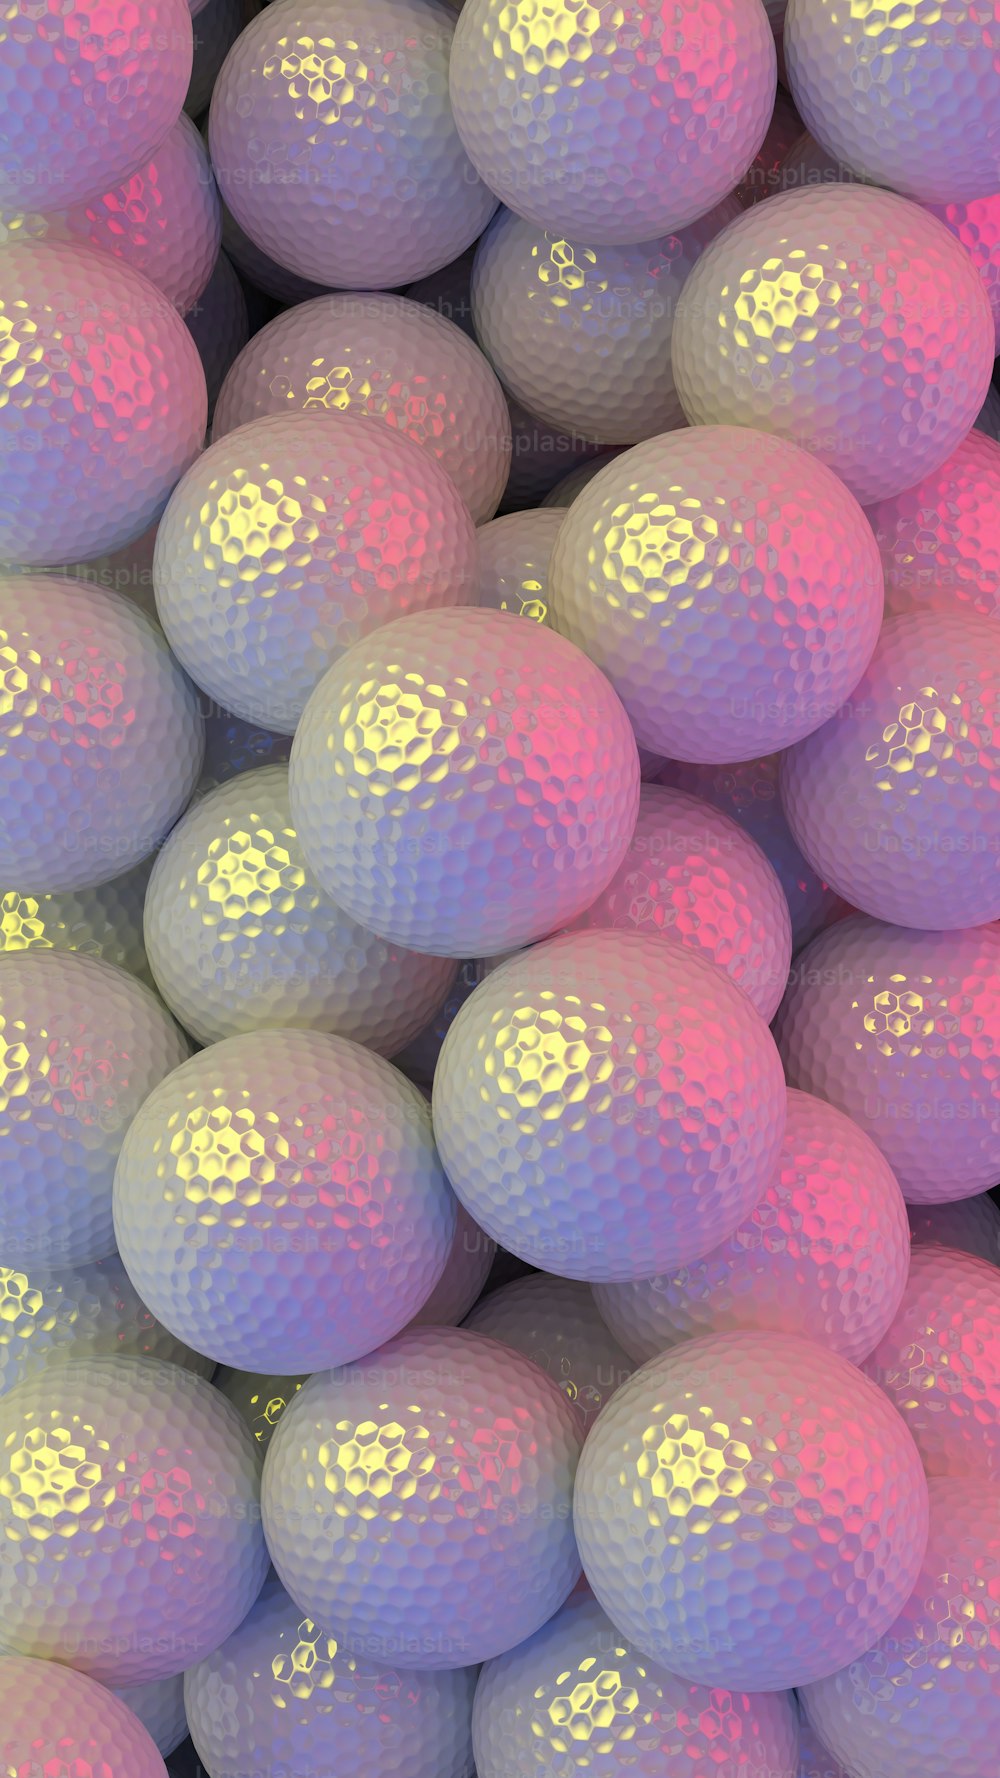 a pile of pink and white golf balls